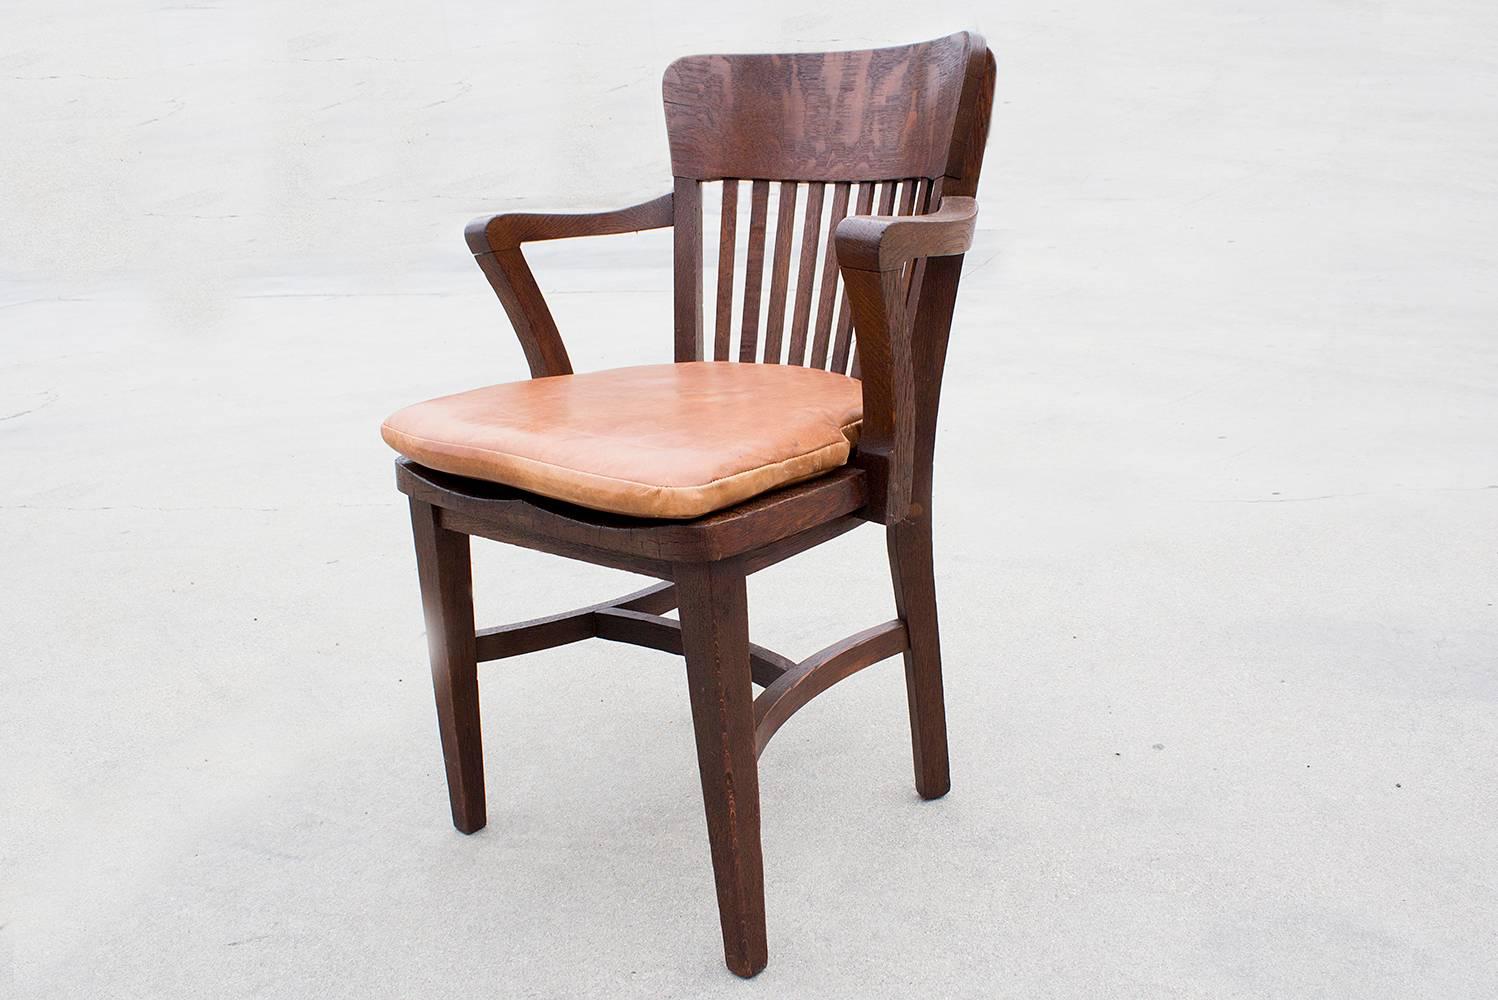 Beautifully articulated oak lawyer chair, circa 1940s. Features newly reupholstered leather seat, slat back and reconditioned wood frame. Excellent refinished condition.

Dimensions: 22.5